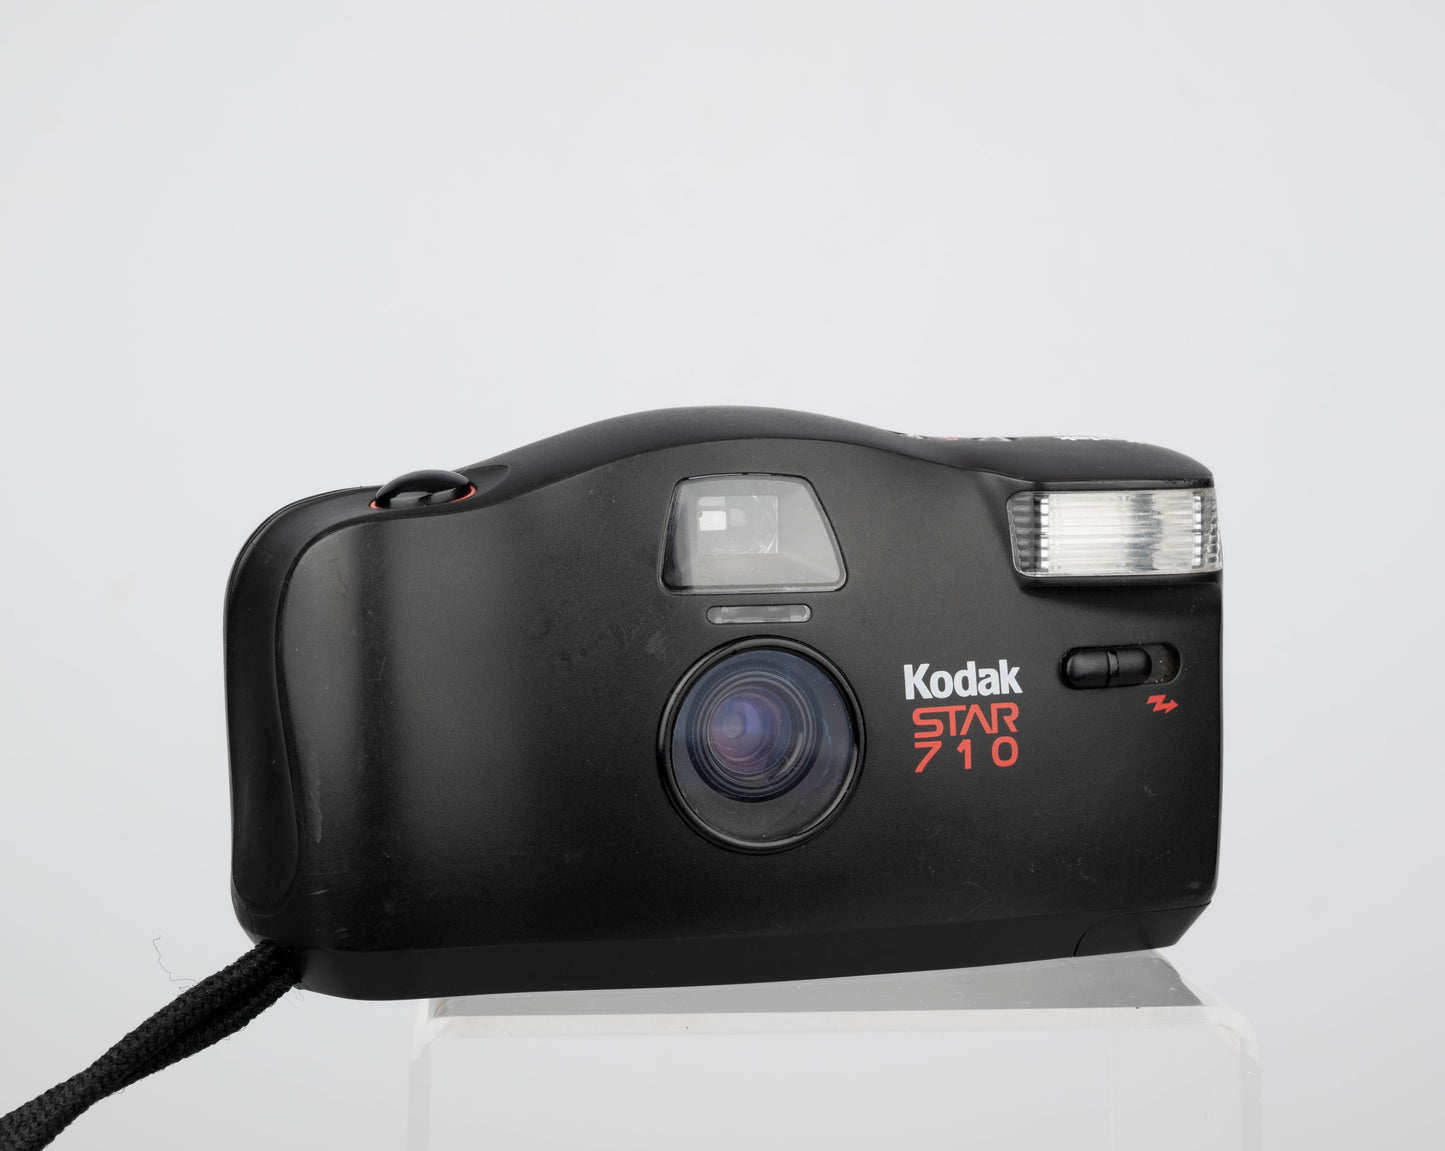 The Kodak Star 710 is a basic motor-drive focus-free 35mm film camera from the early 1990s